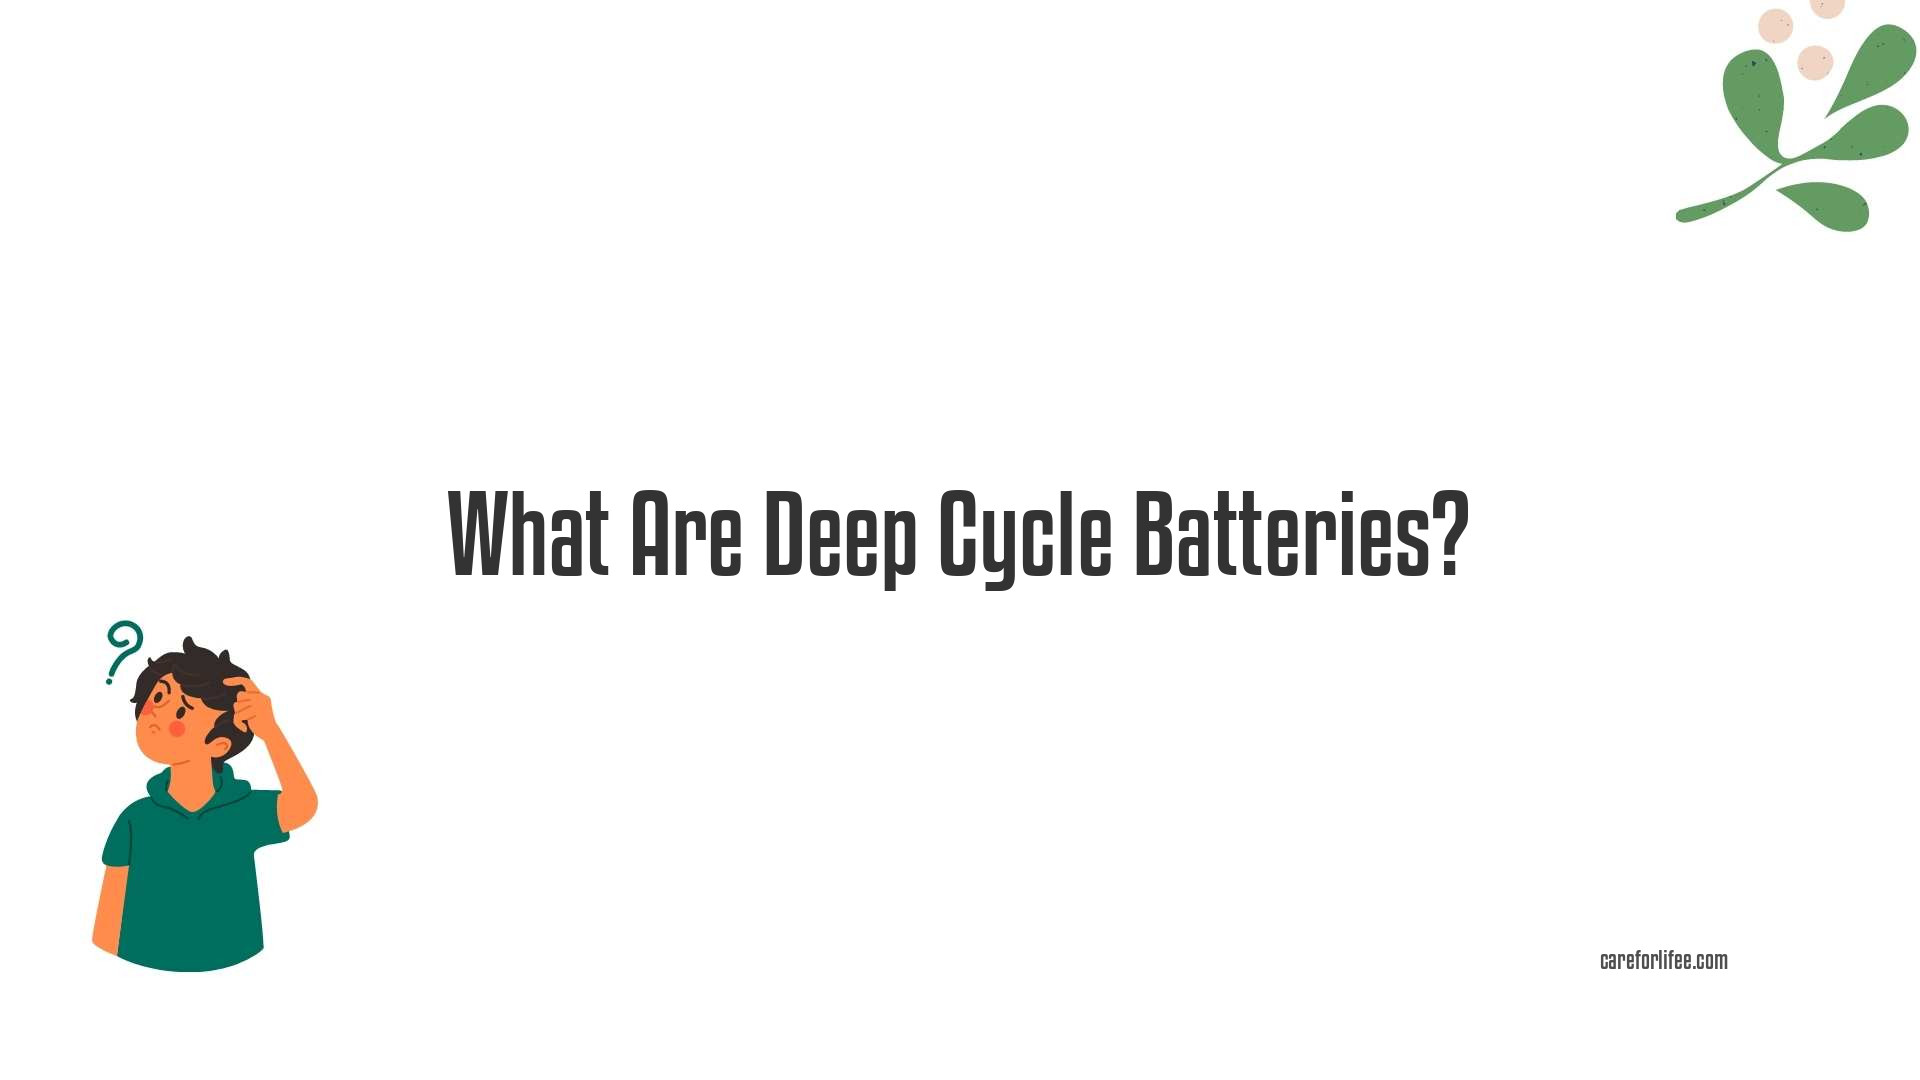 What Are Deep Cycle Batteries?